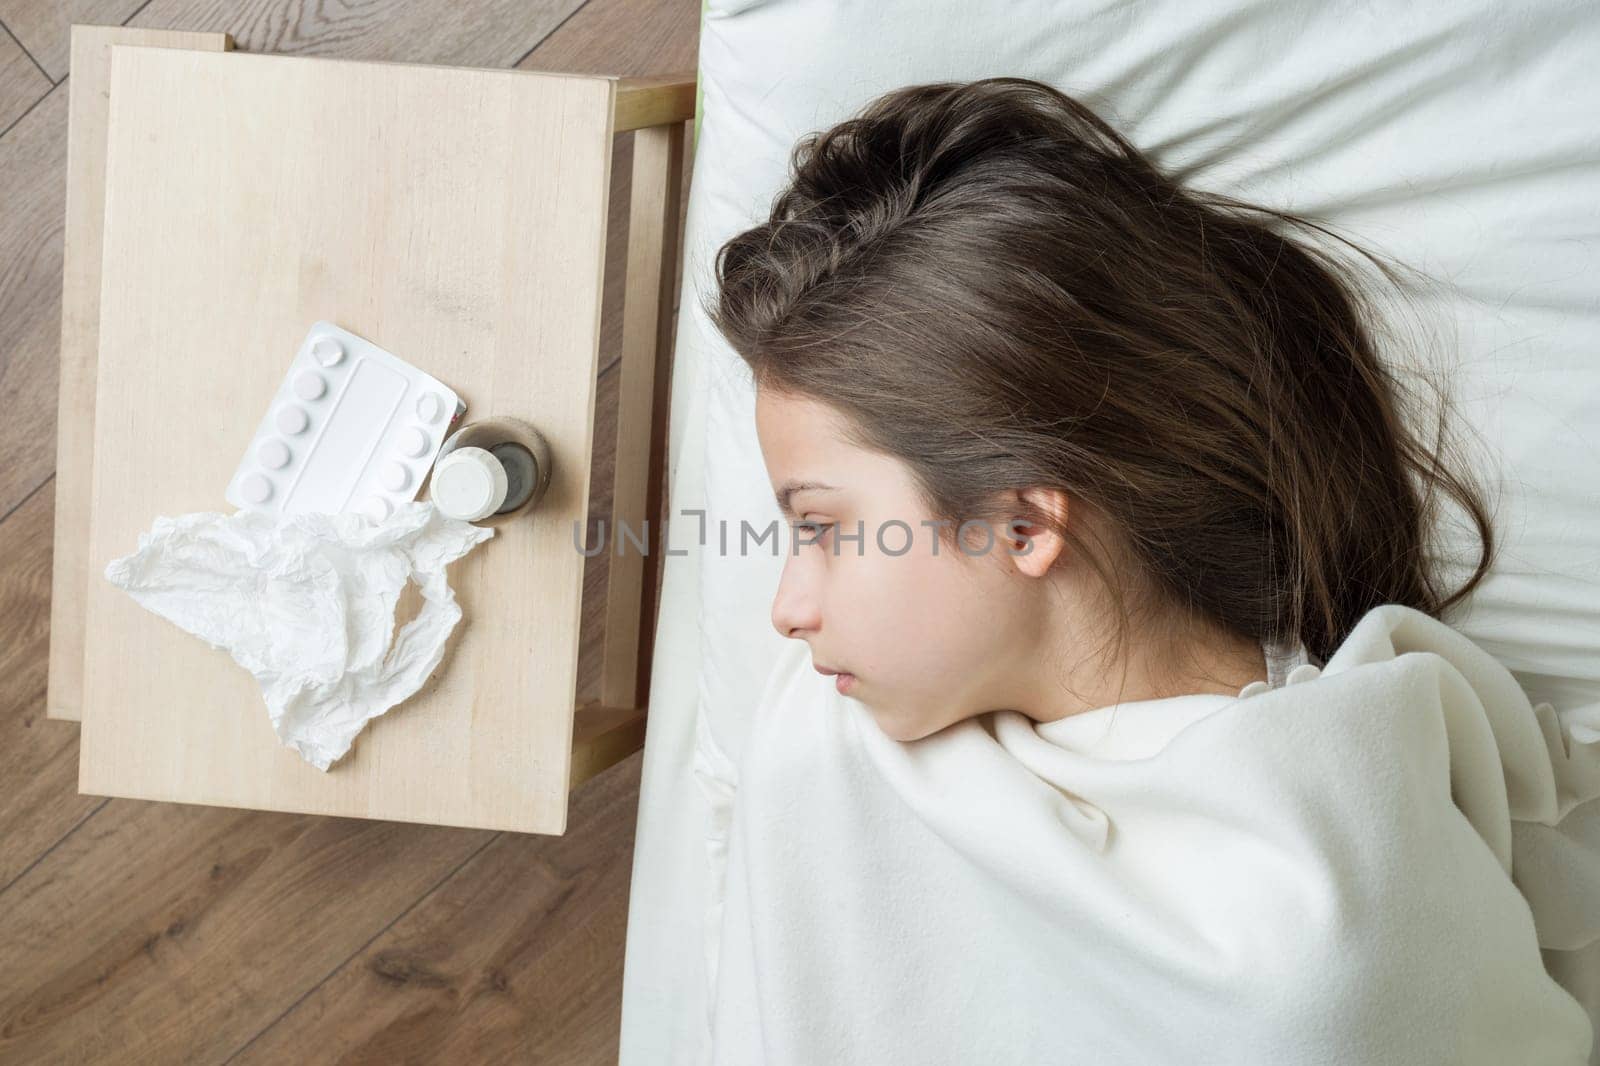 Child in bed at home caught cold, taking medicines, flu season.